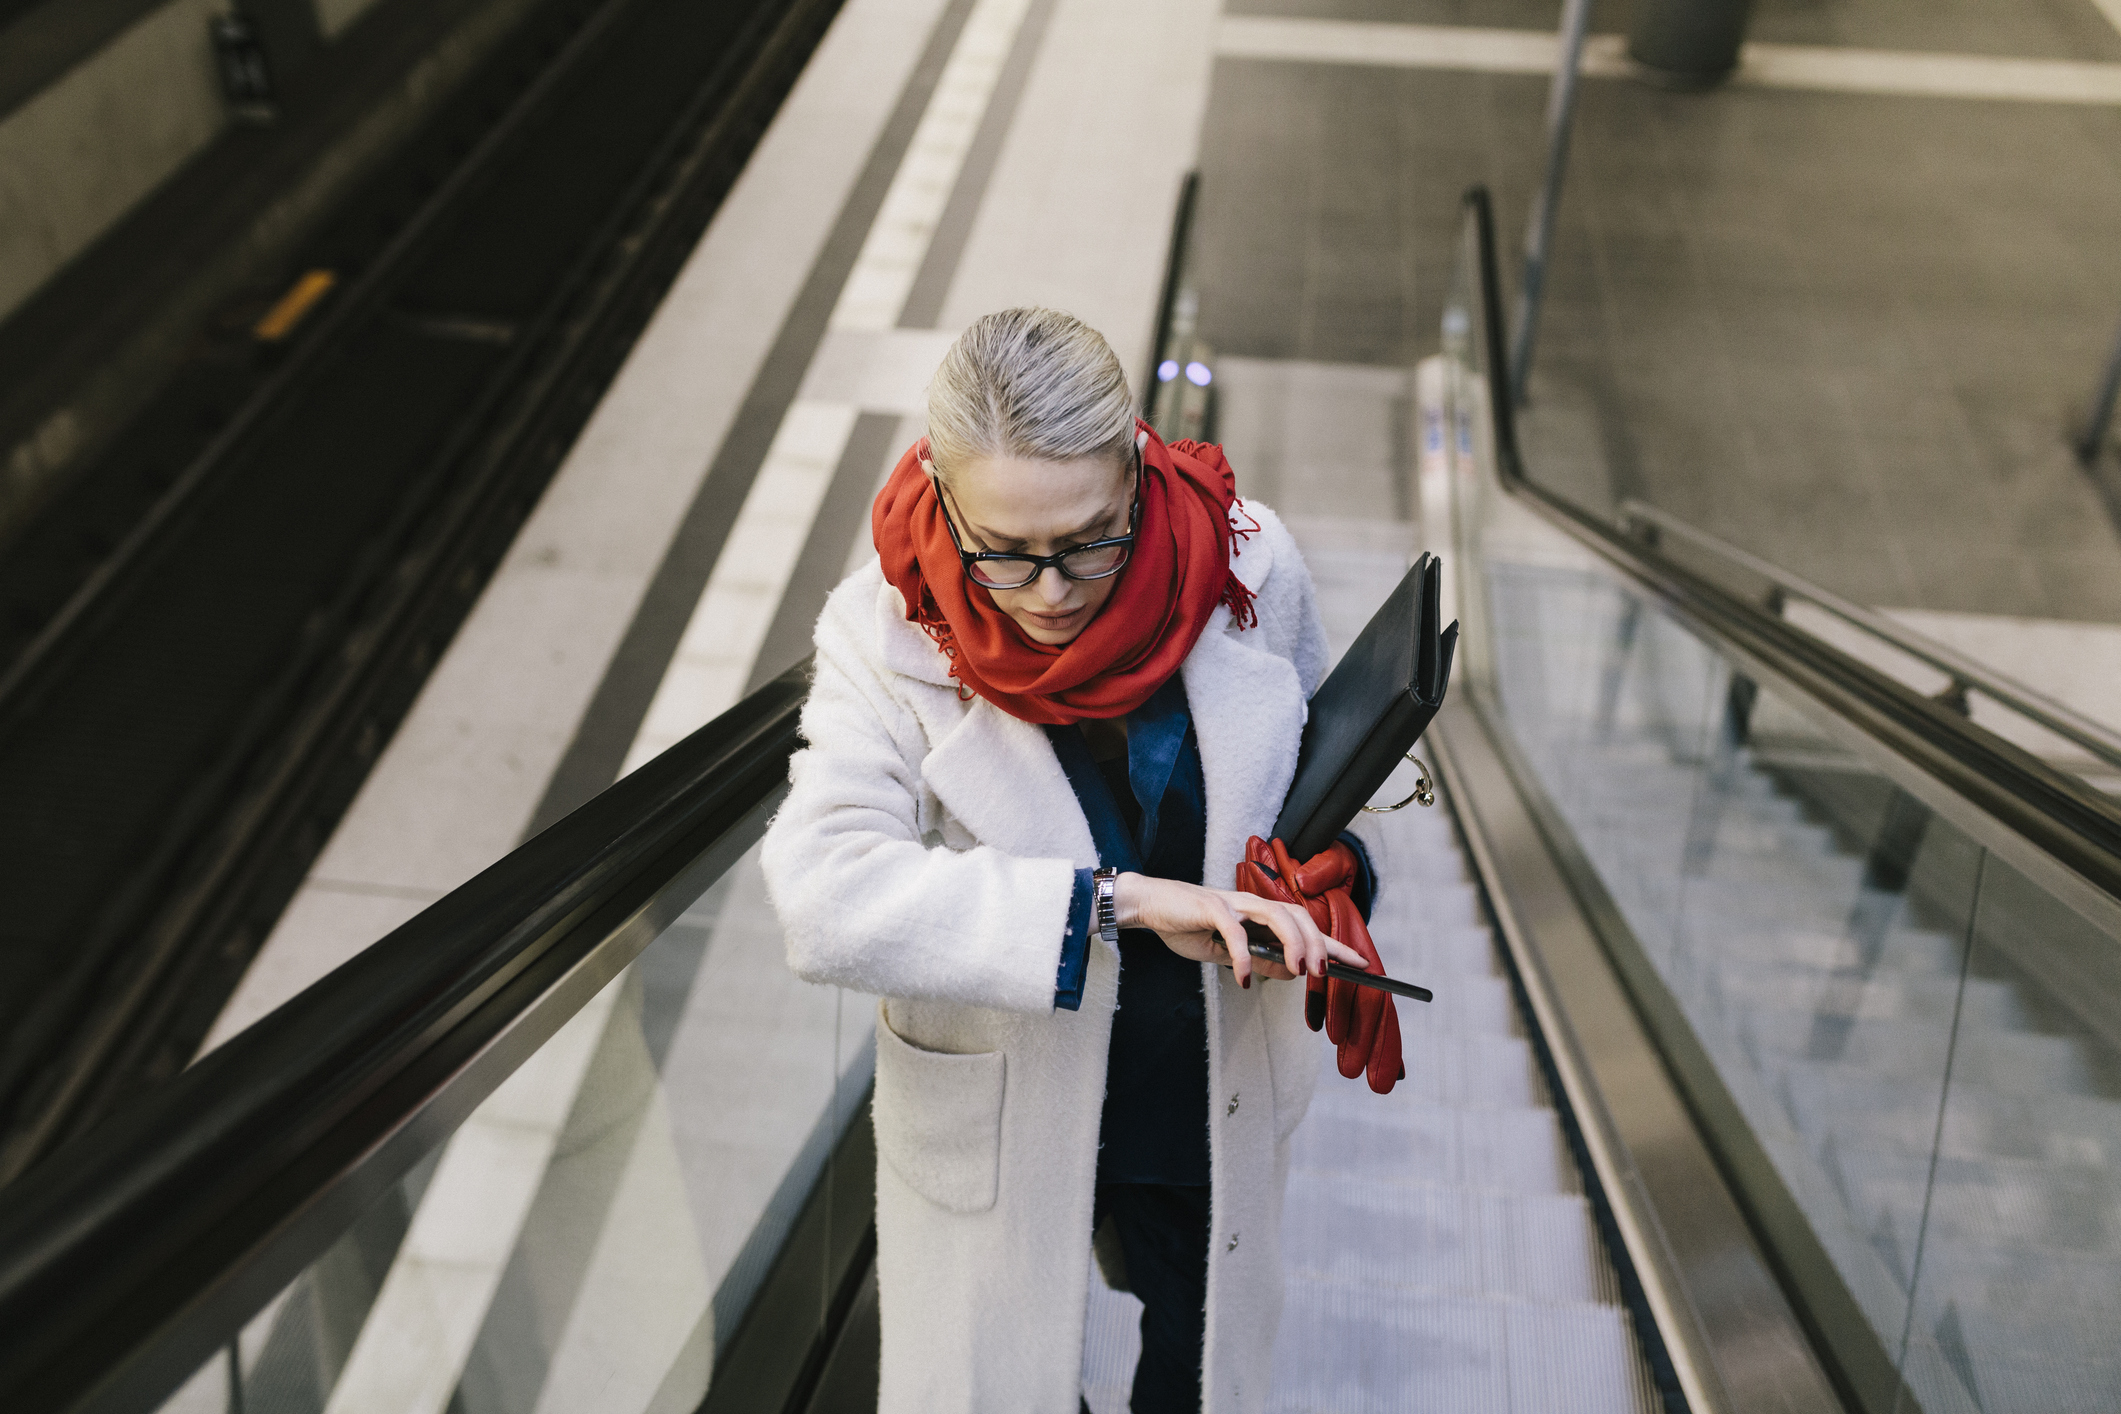 Woman in a white coat using an escalator, looking at her phone, with a red scarf and glasses